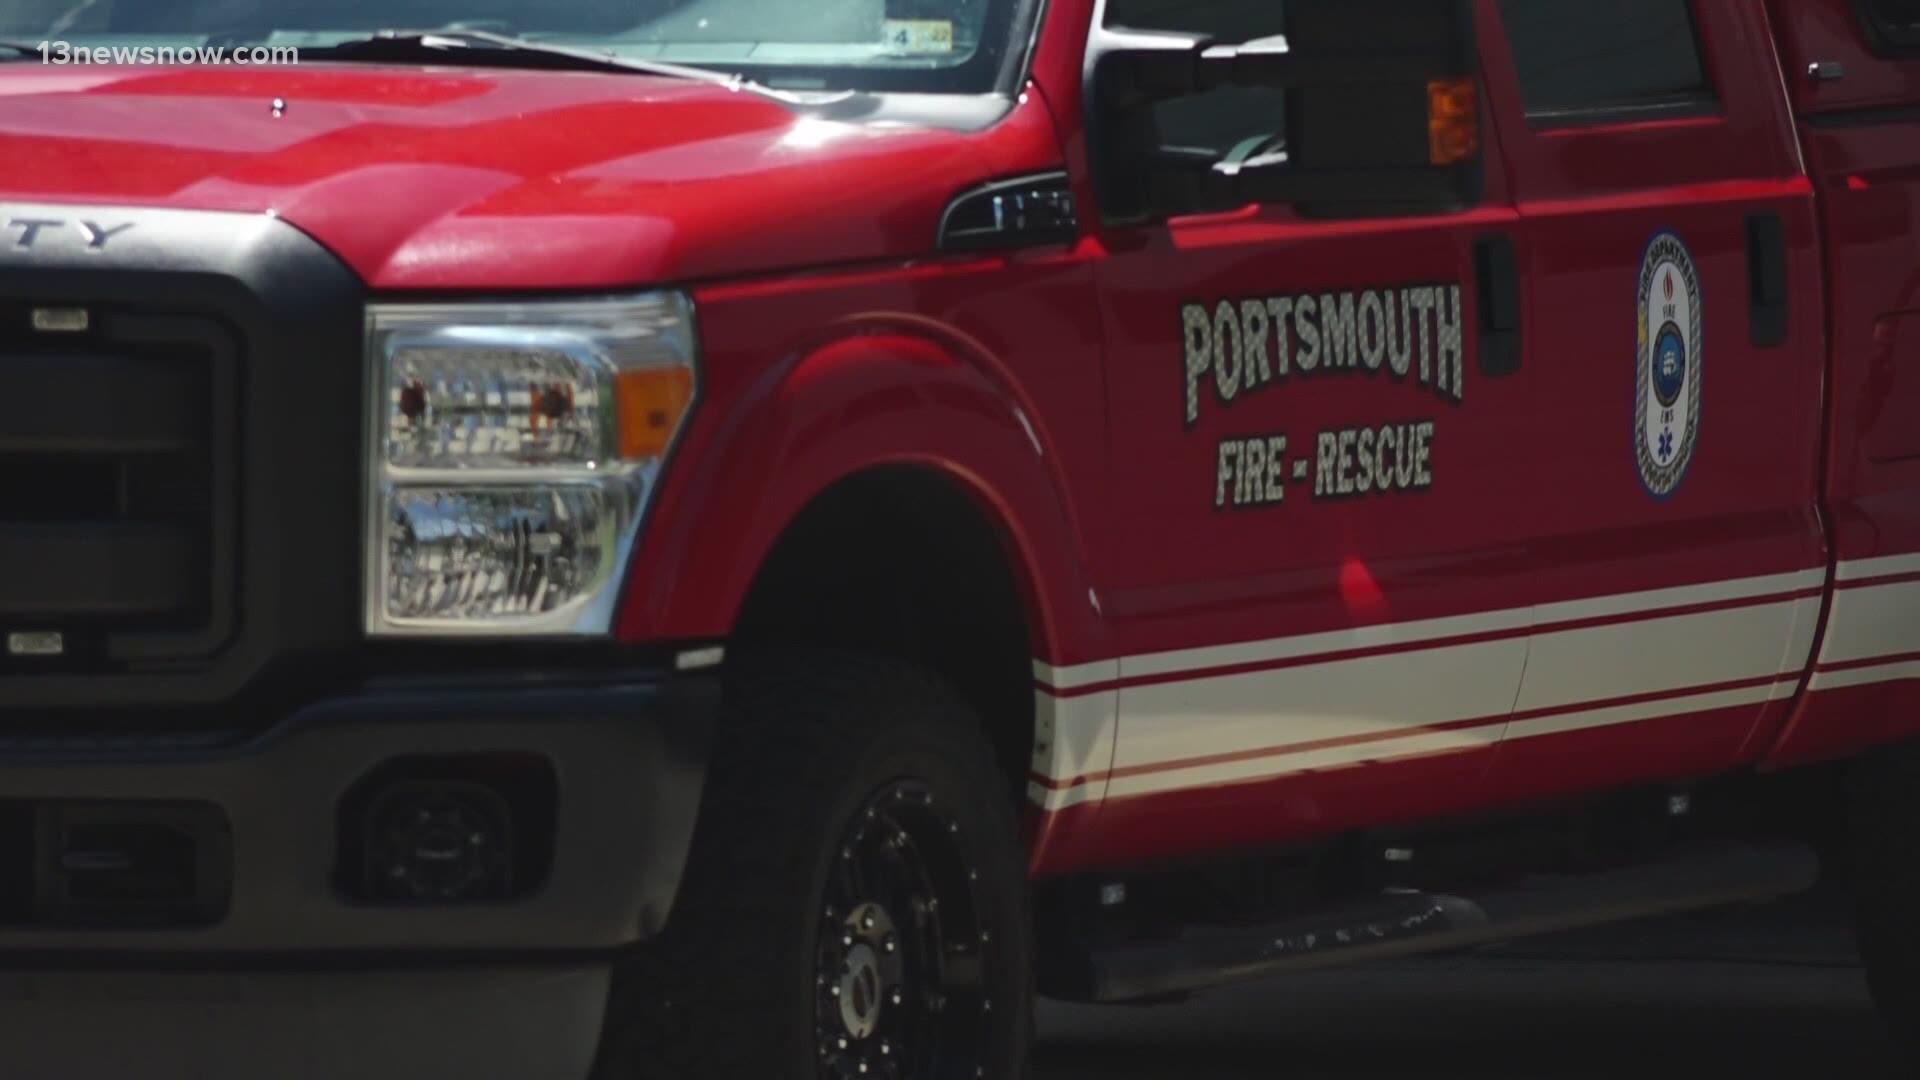 Collective bargaining would allow Portsmouth's firefighters and other city employees to negotiate their work conditions.